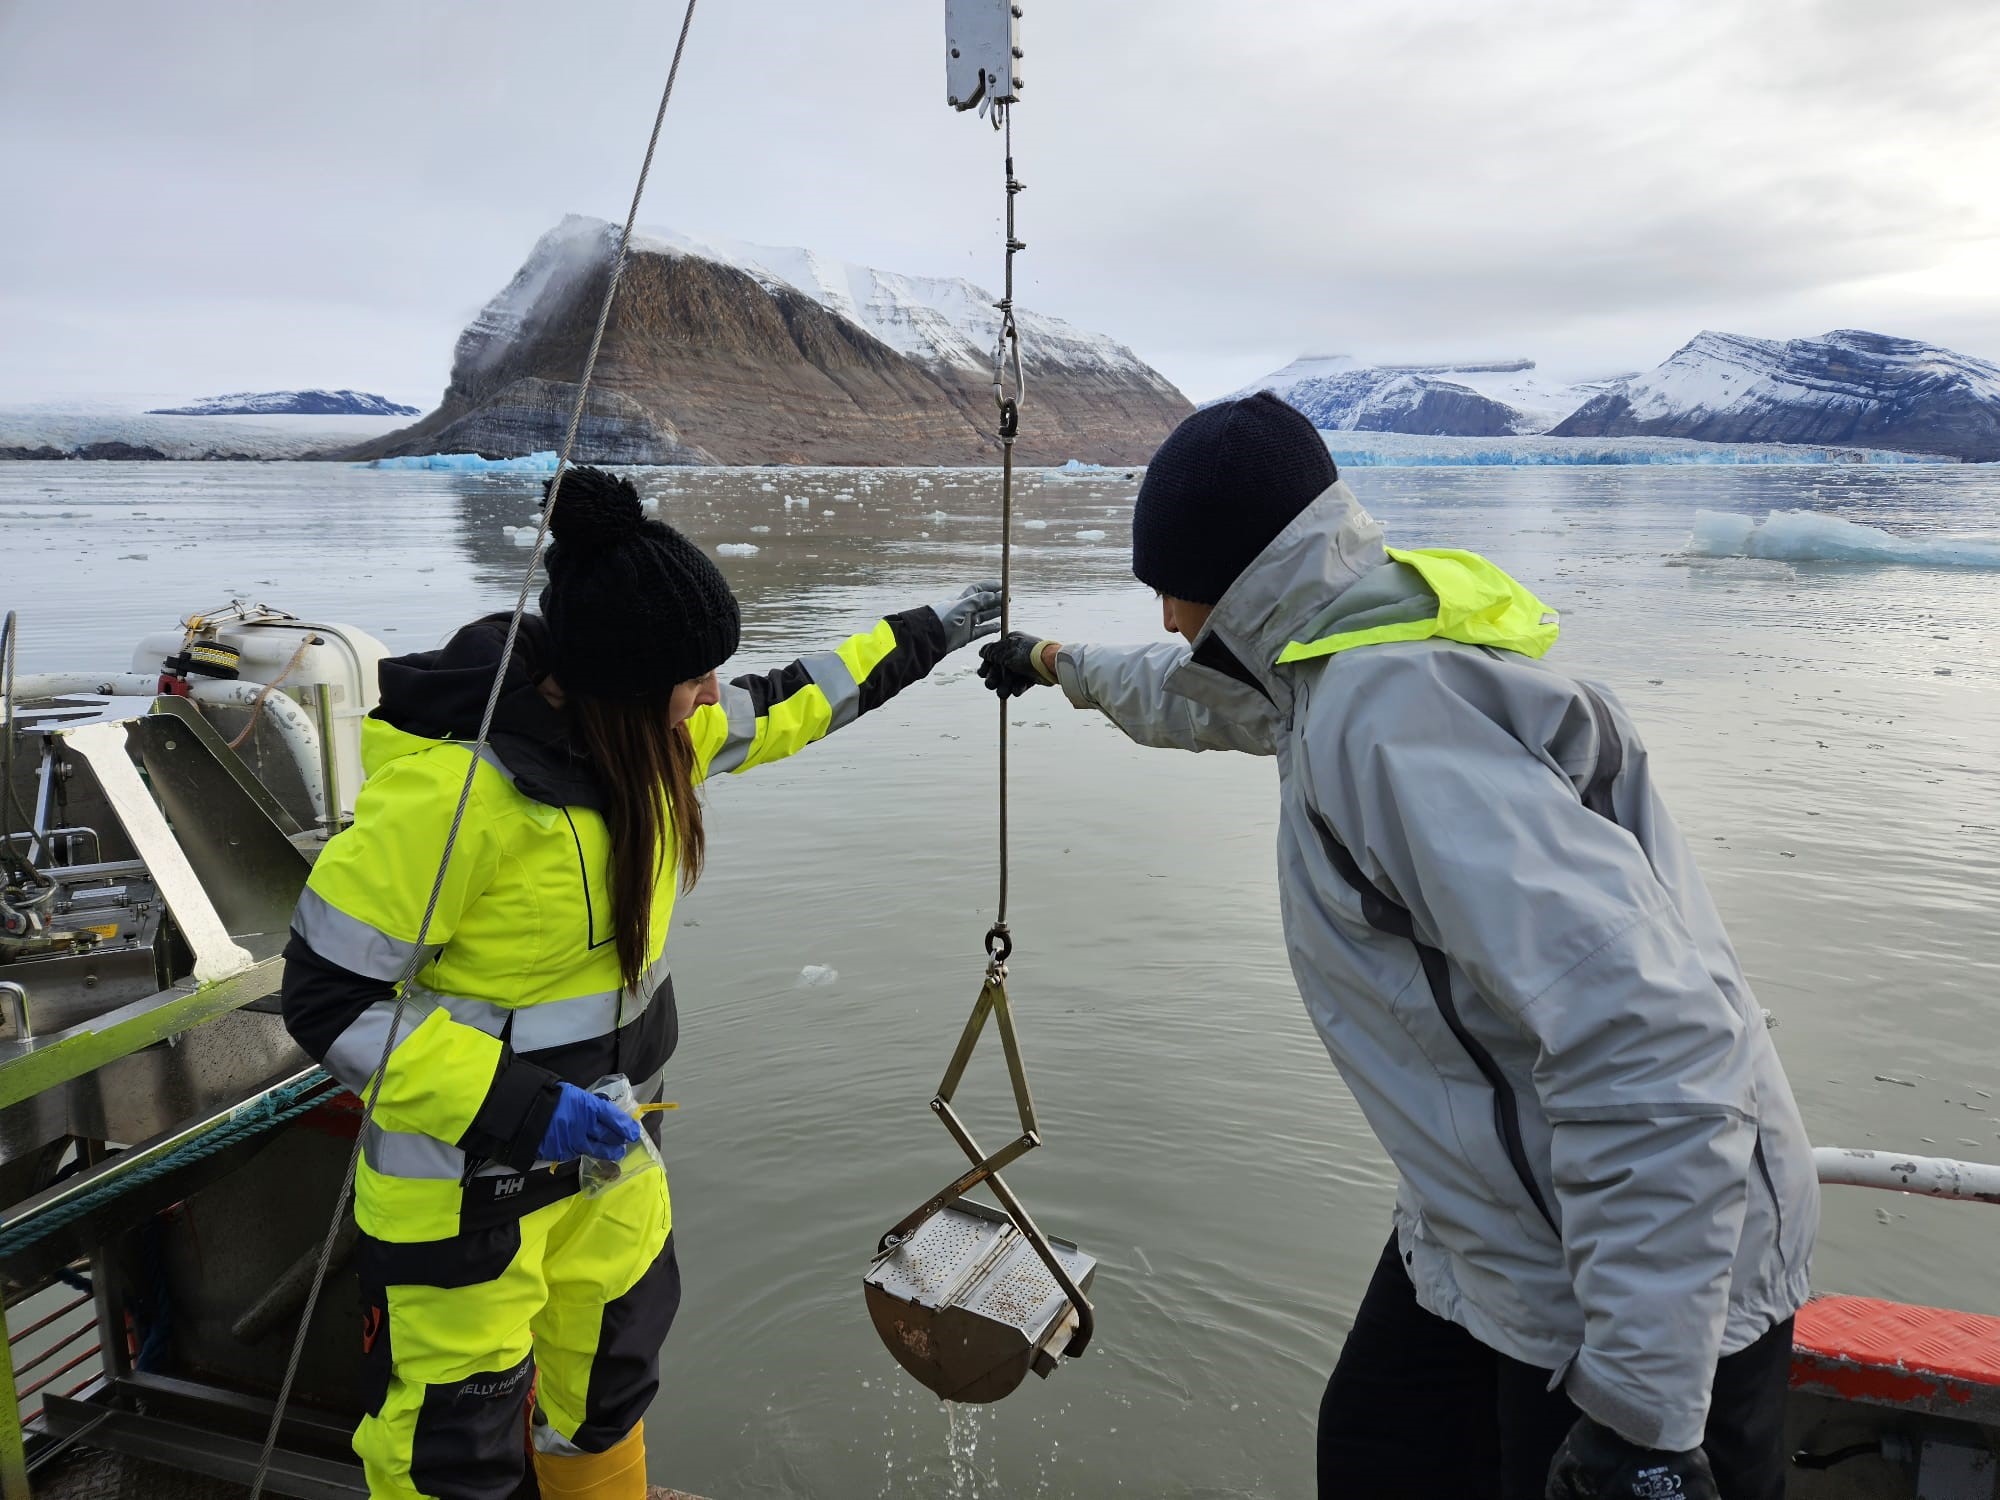 Two ICEBERG researchers lifting a sample collecting device from the ocean in an arctic landscape.